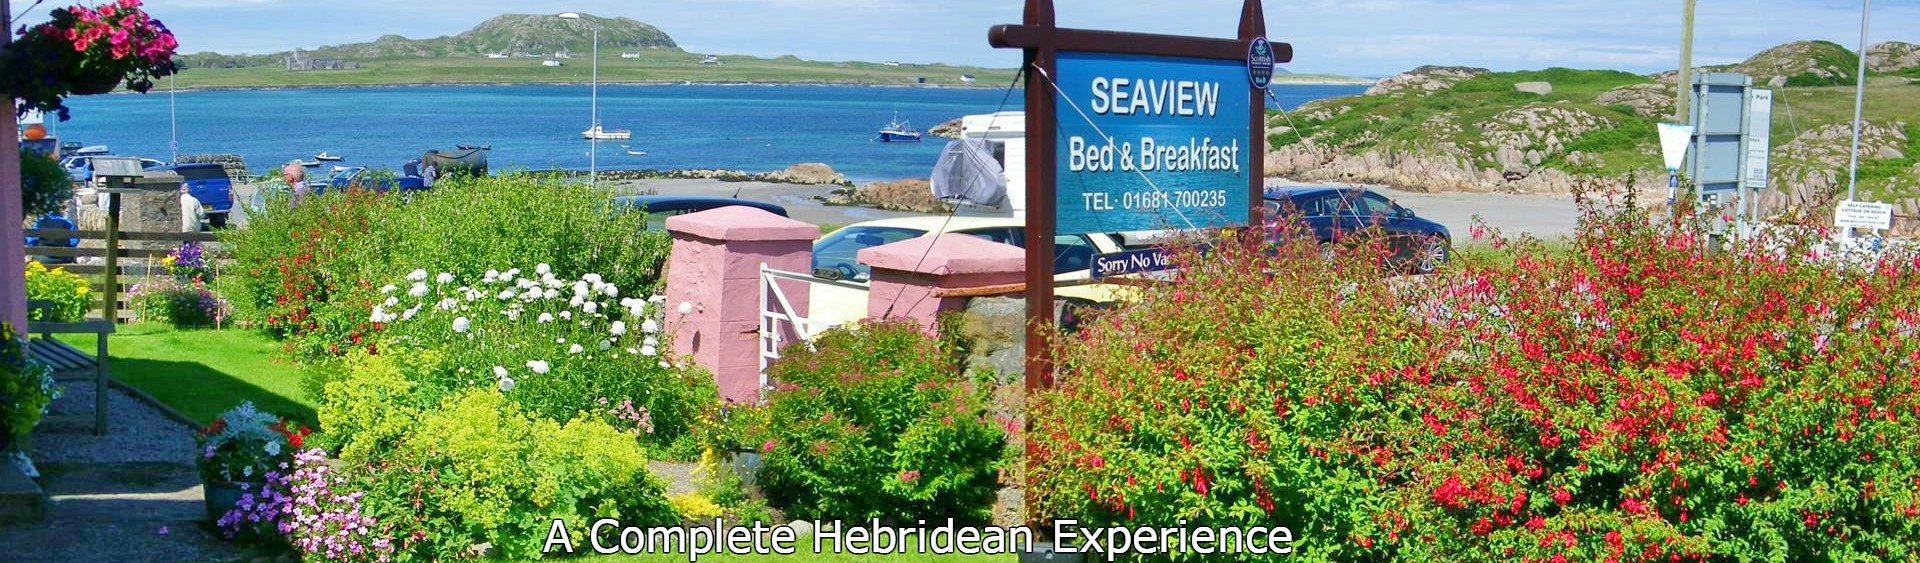 Seaview Bed and Breakfast, Isle of Mull